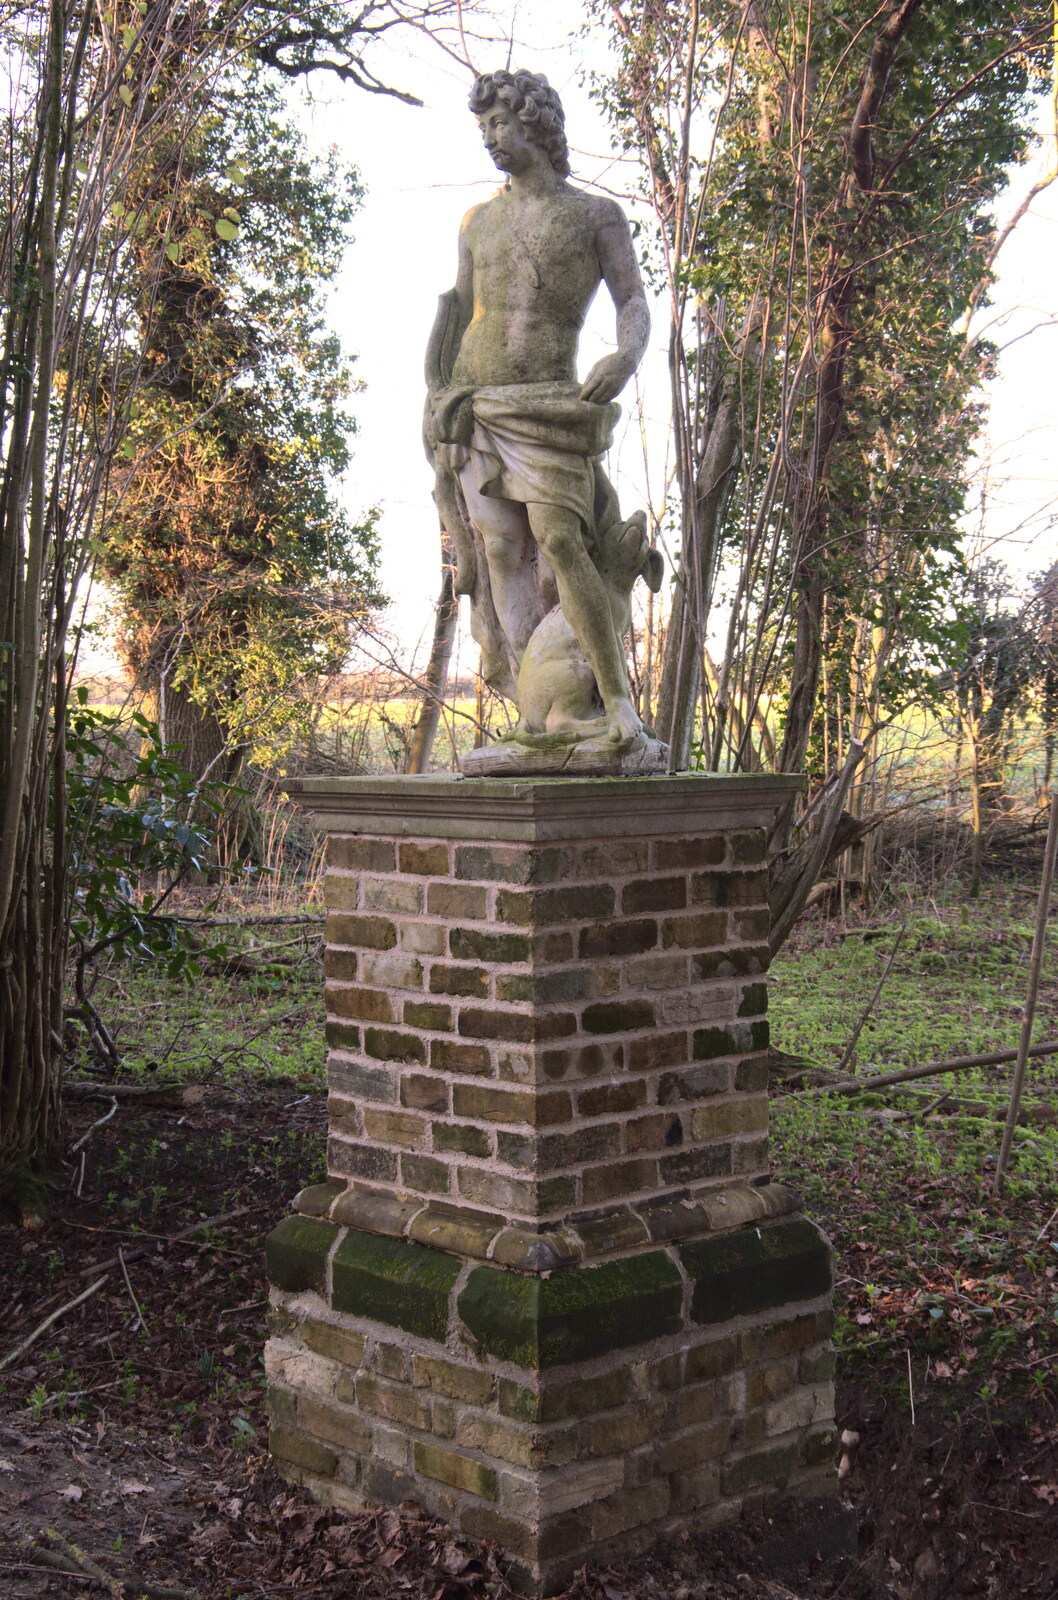 A random statue in the woods from Snowdrops at Talconeston Hall, Tacolneston, Norfolk - 7th February 2020